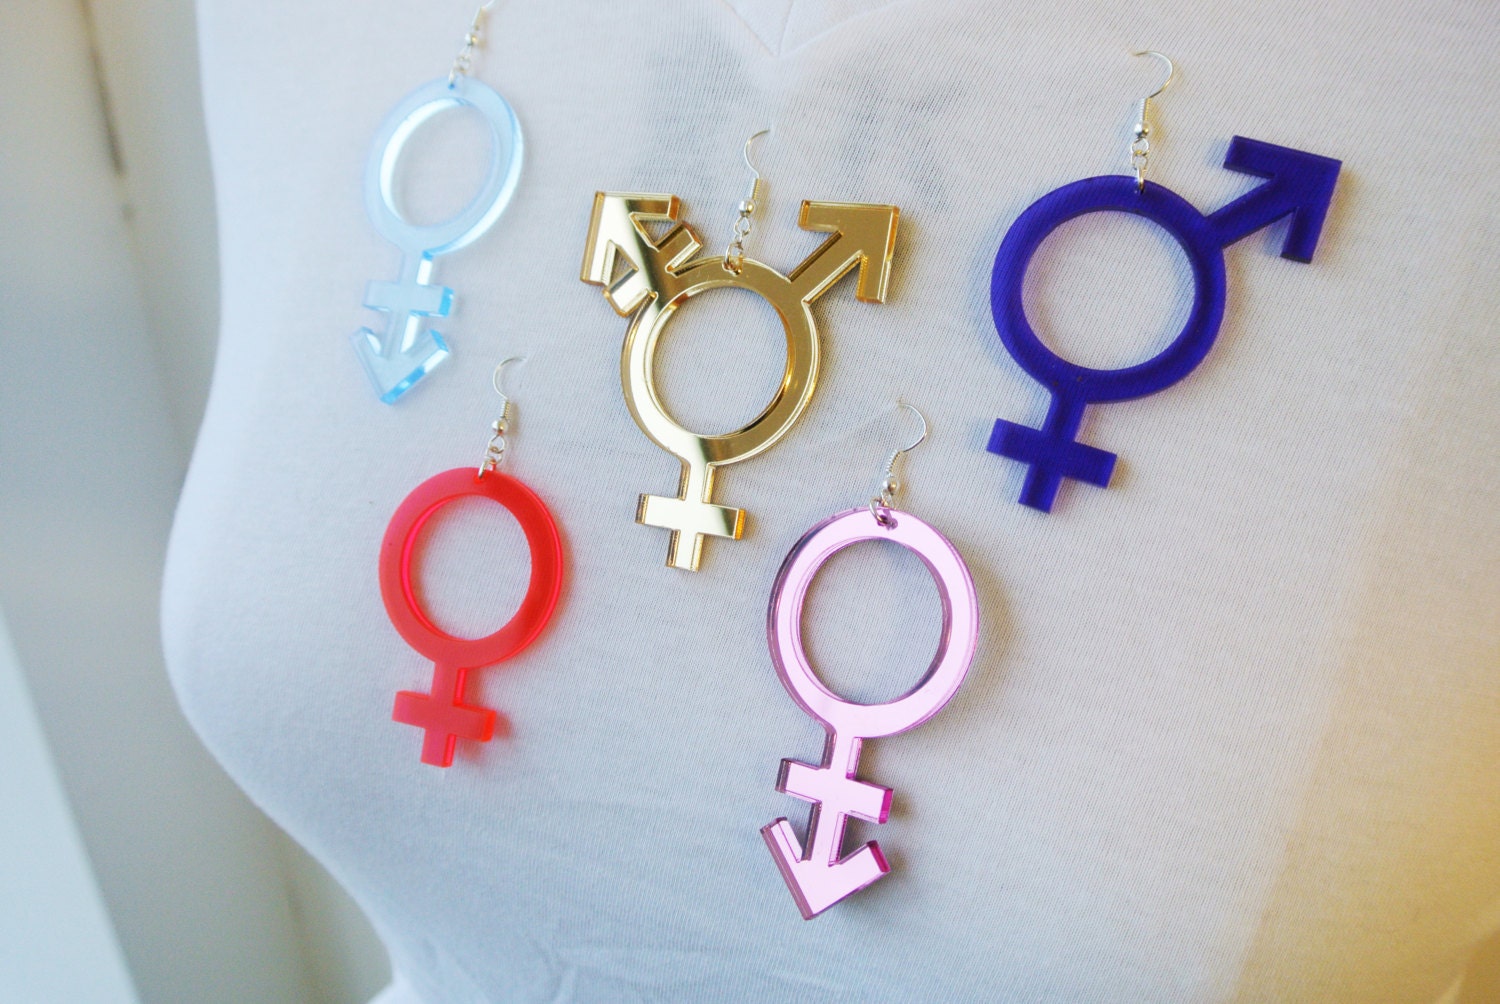 an androgynous, trans, bi-gender and female symbol selection of earrings by Anna mulhearn for animalhair.